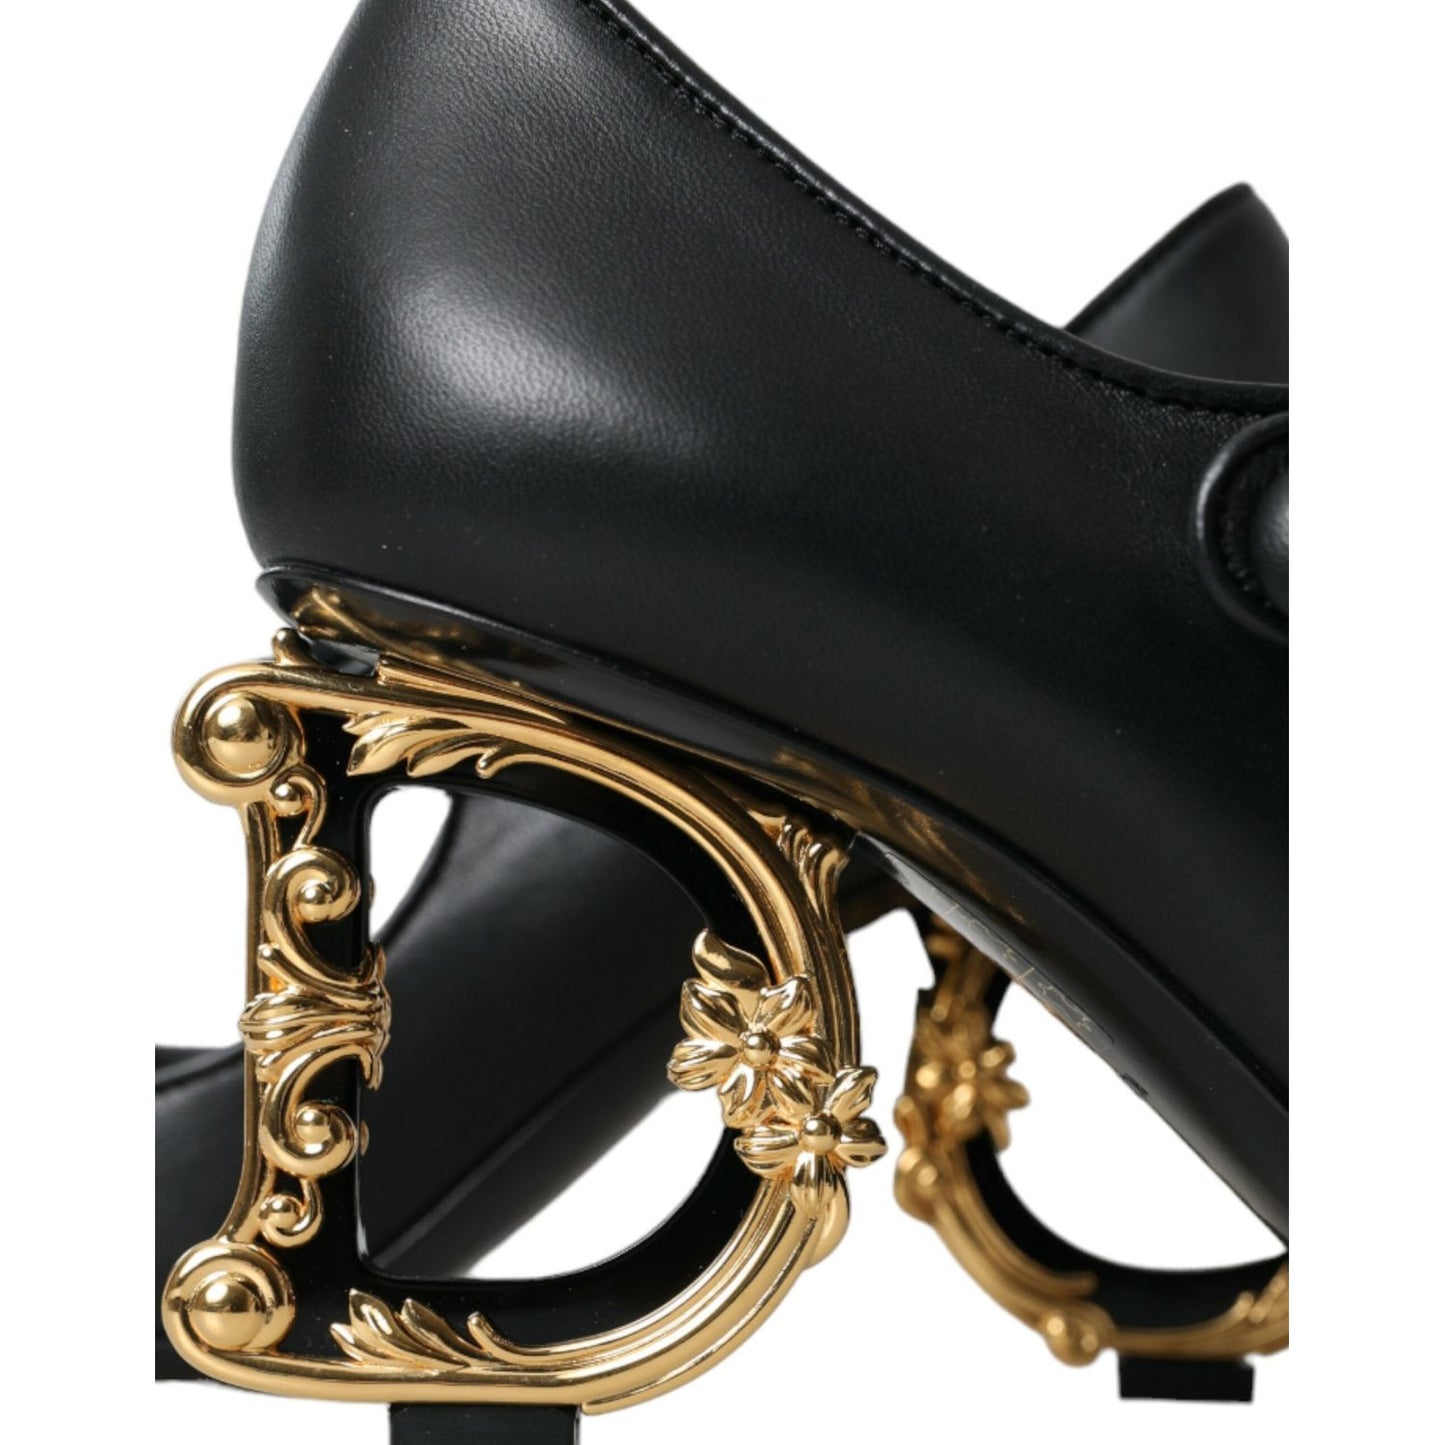 Dolce & Gabbana Black Leather Logo Heels Mary Janes Pumps Shoes black-leather-logo-heels-mary-janes-pumps-shoes